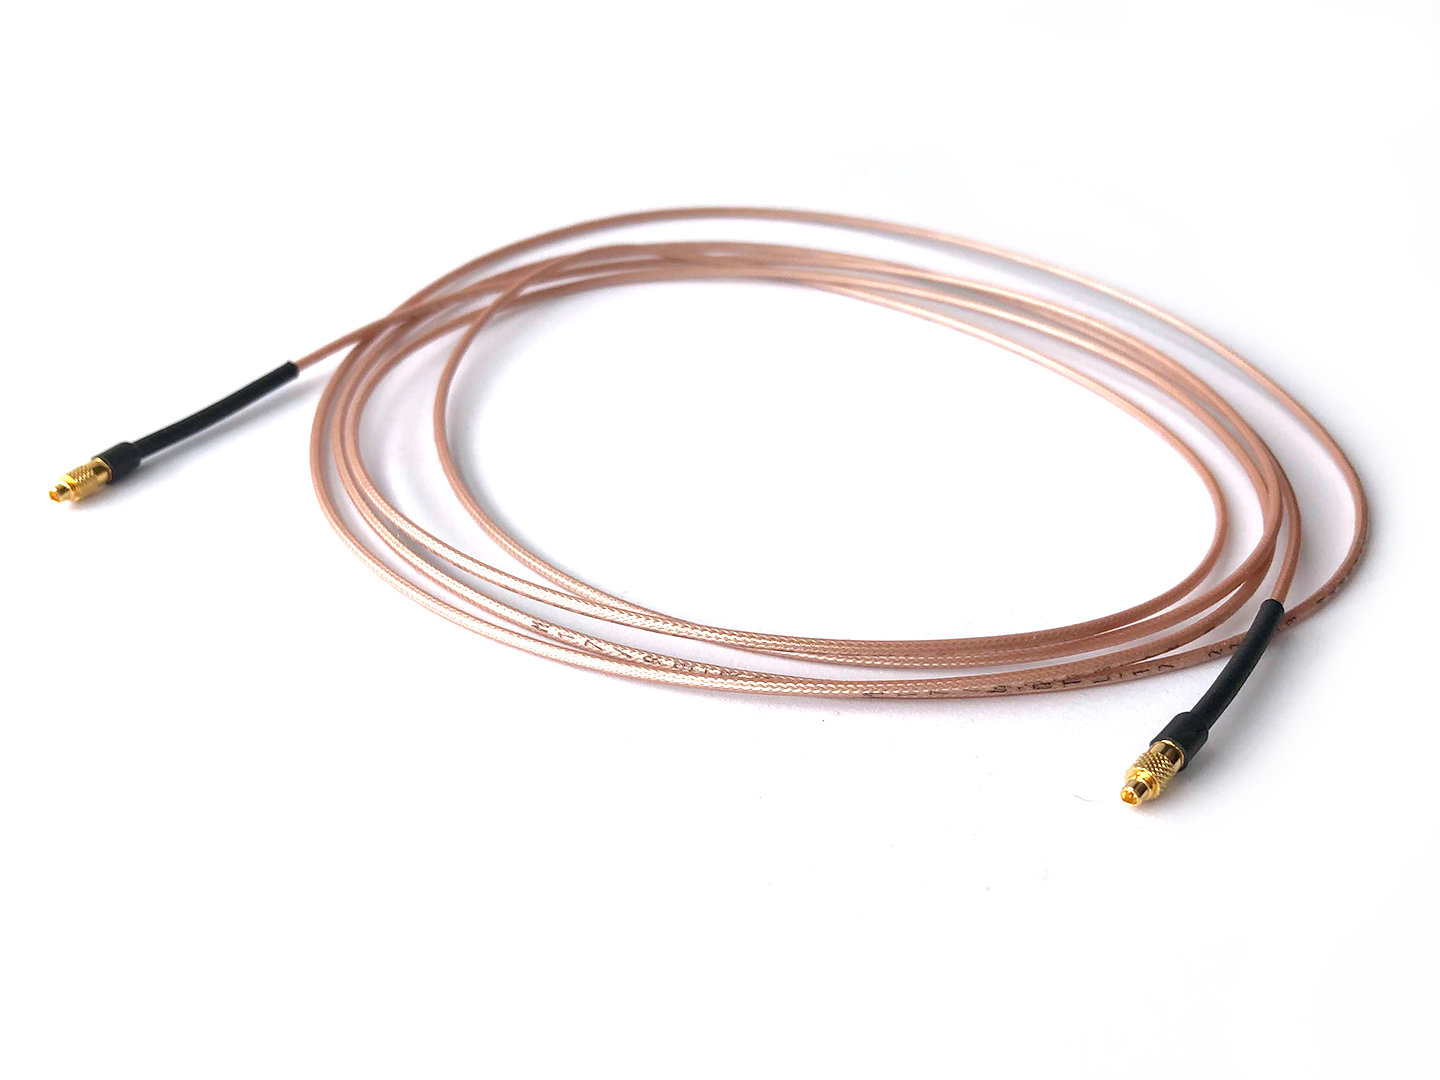 MMCX to MMCX cable